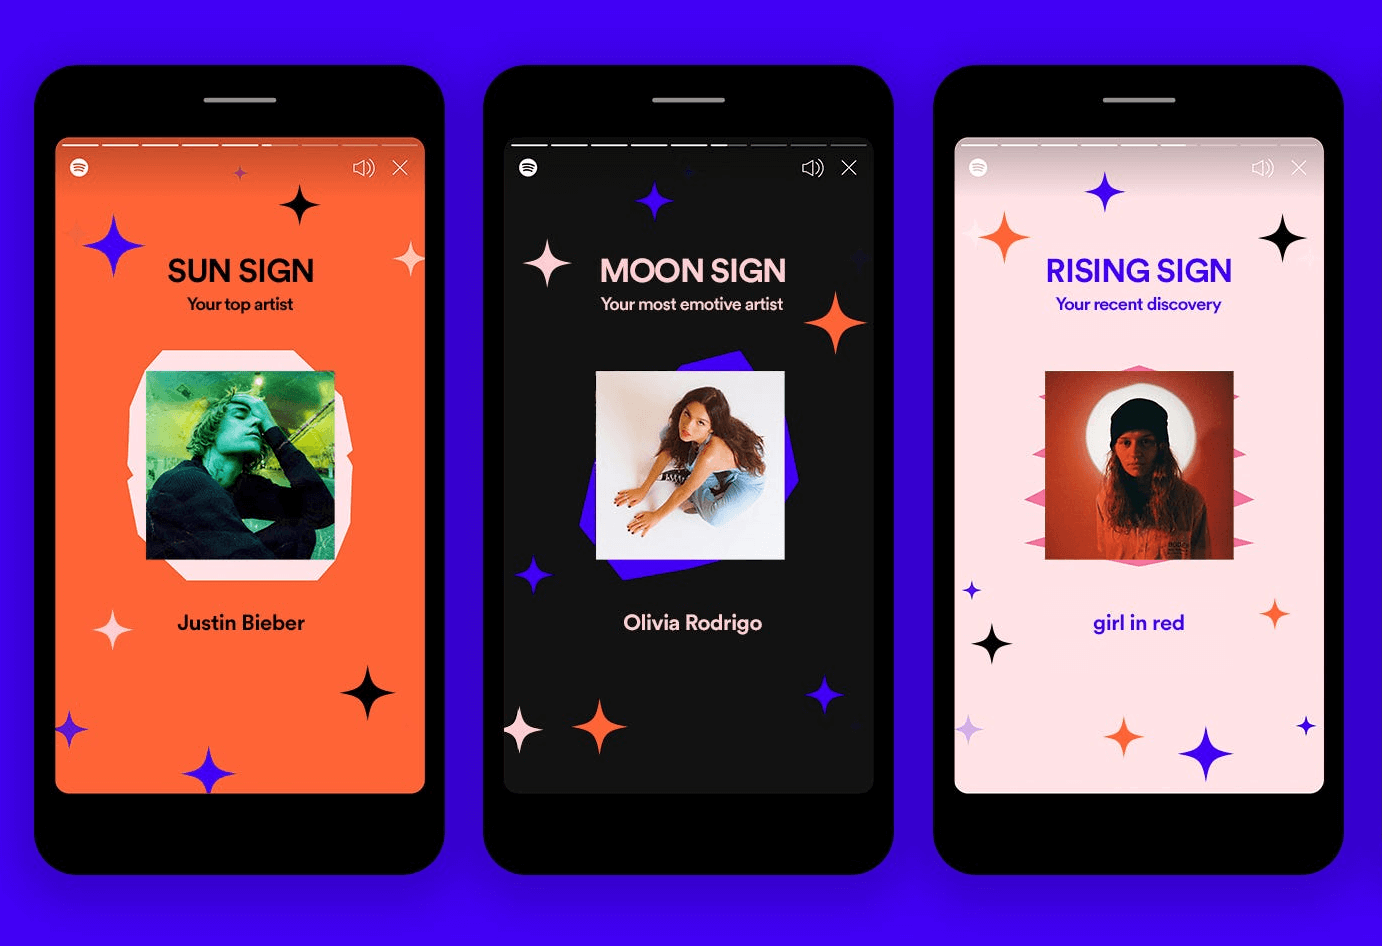 Spotify feature that gives users a birth chart reading based on the artists they listen to